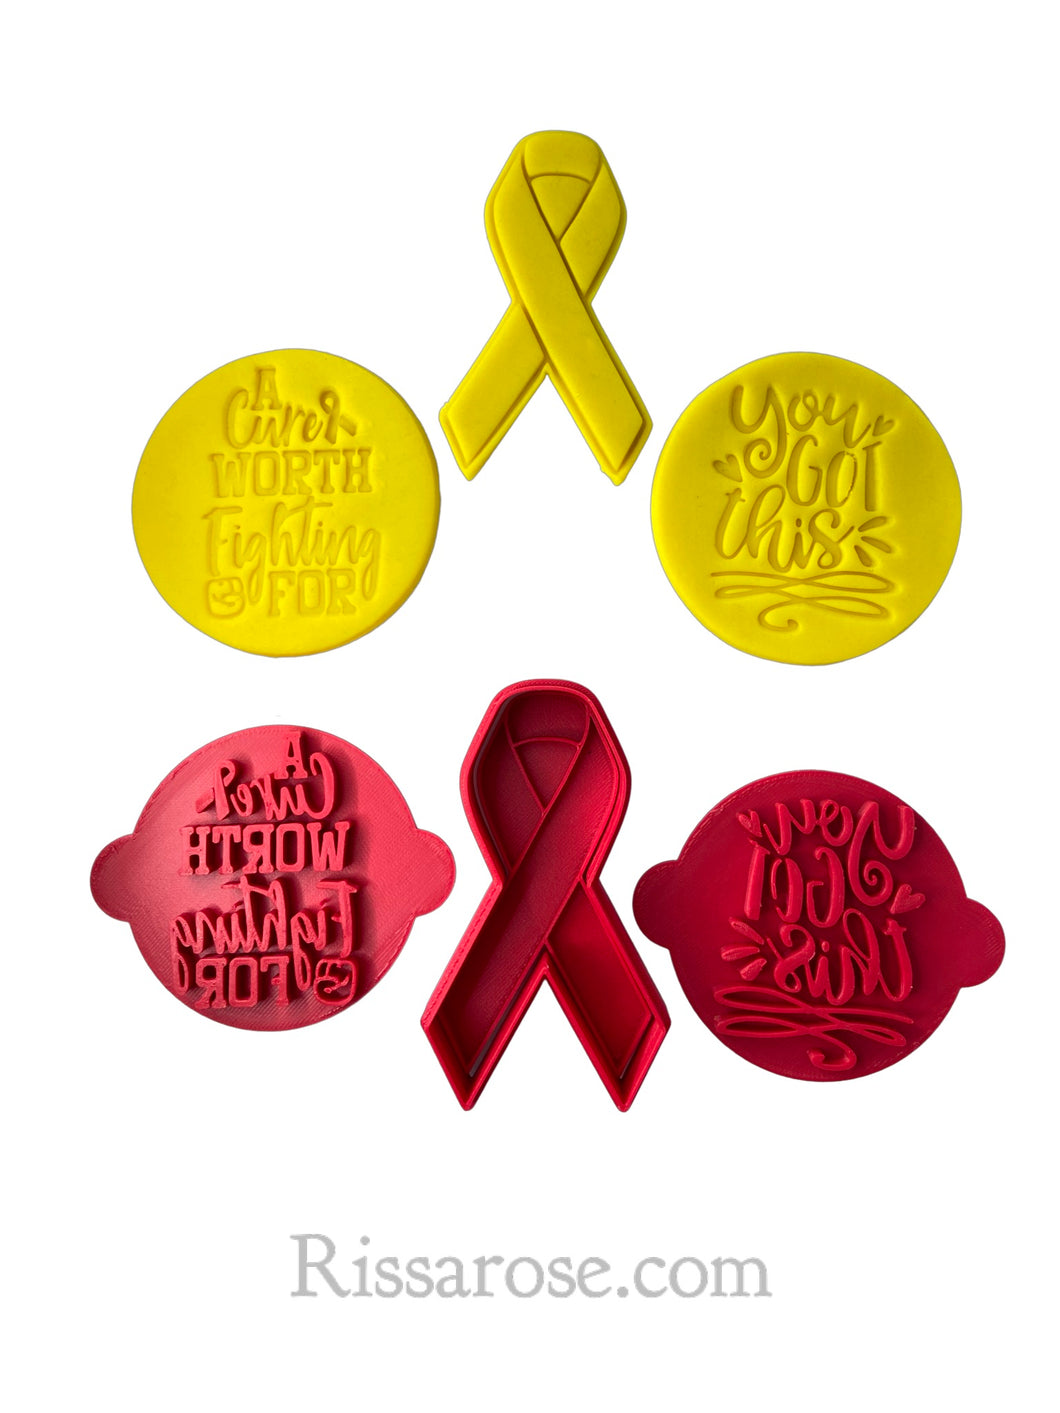 cancer cookie stamp- breast cancer ribbon got this flight for